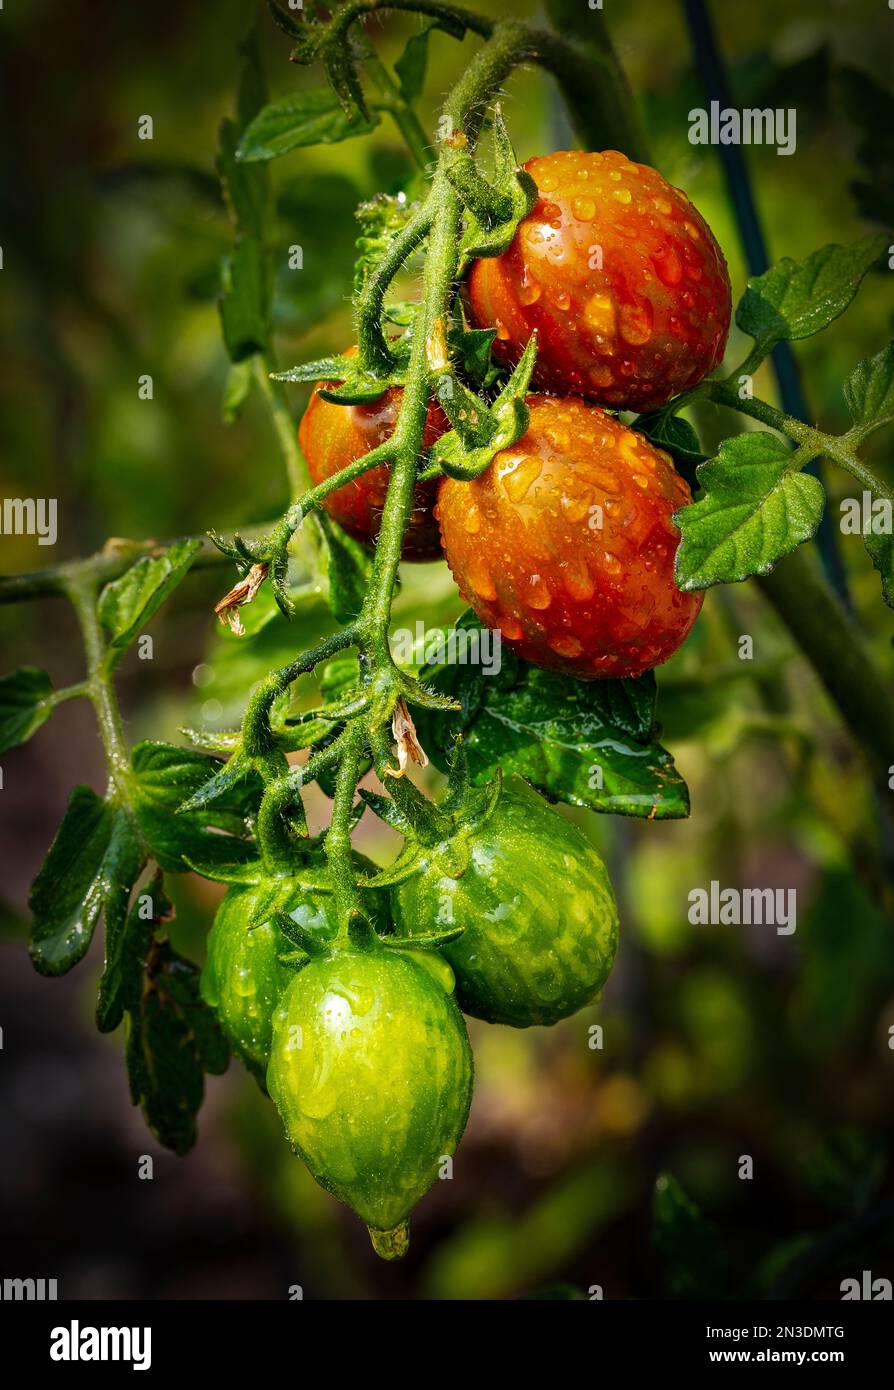 Close up of grape tomatoes (Solanum lycopersicum var. cerasiforme) partially ripened on the vine with water droplets; Alberta, Canada Stock Photo